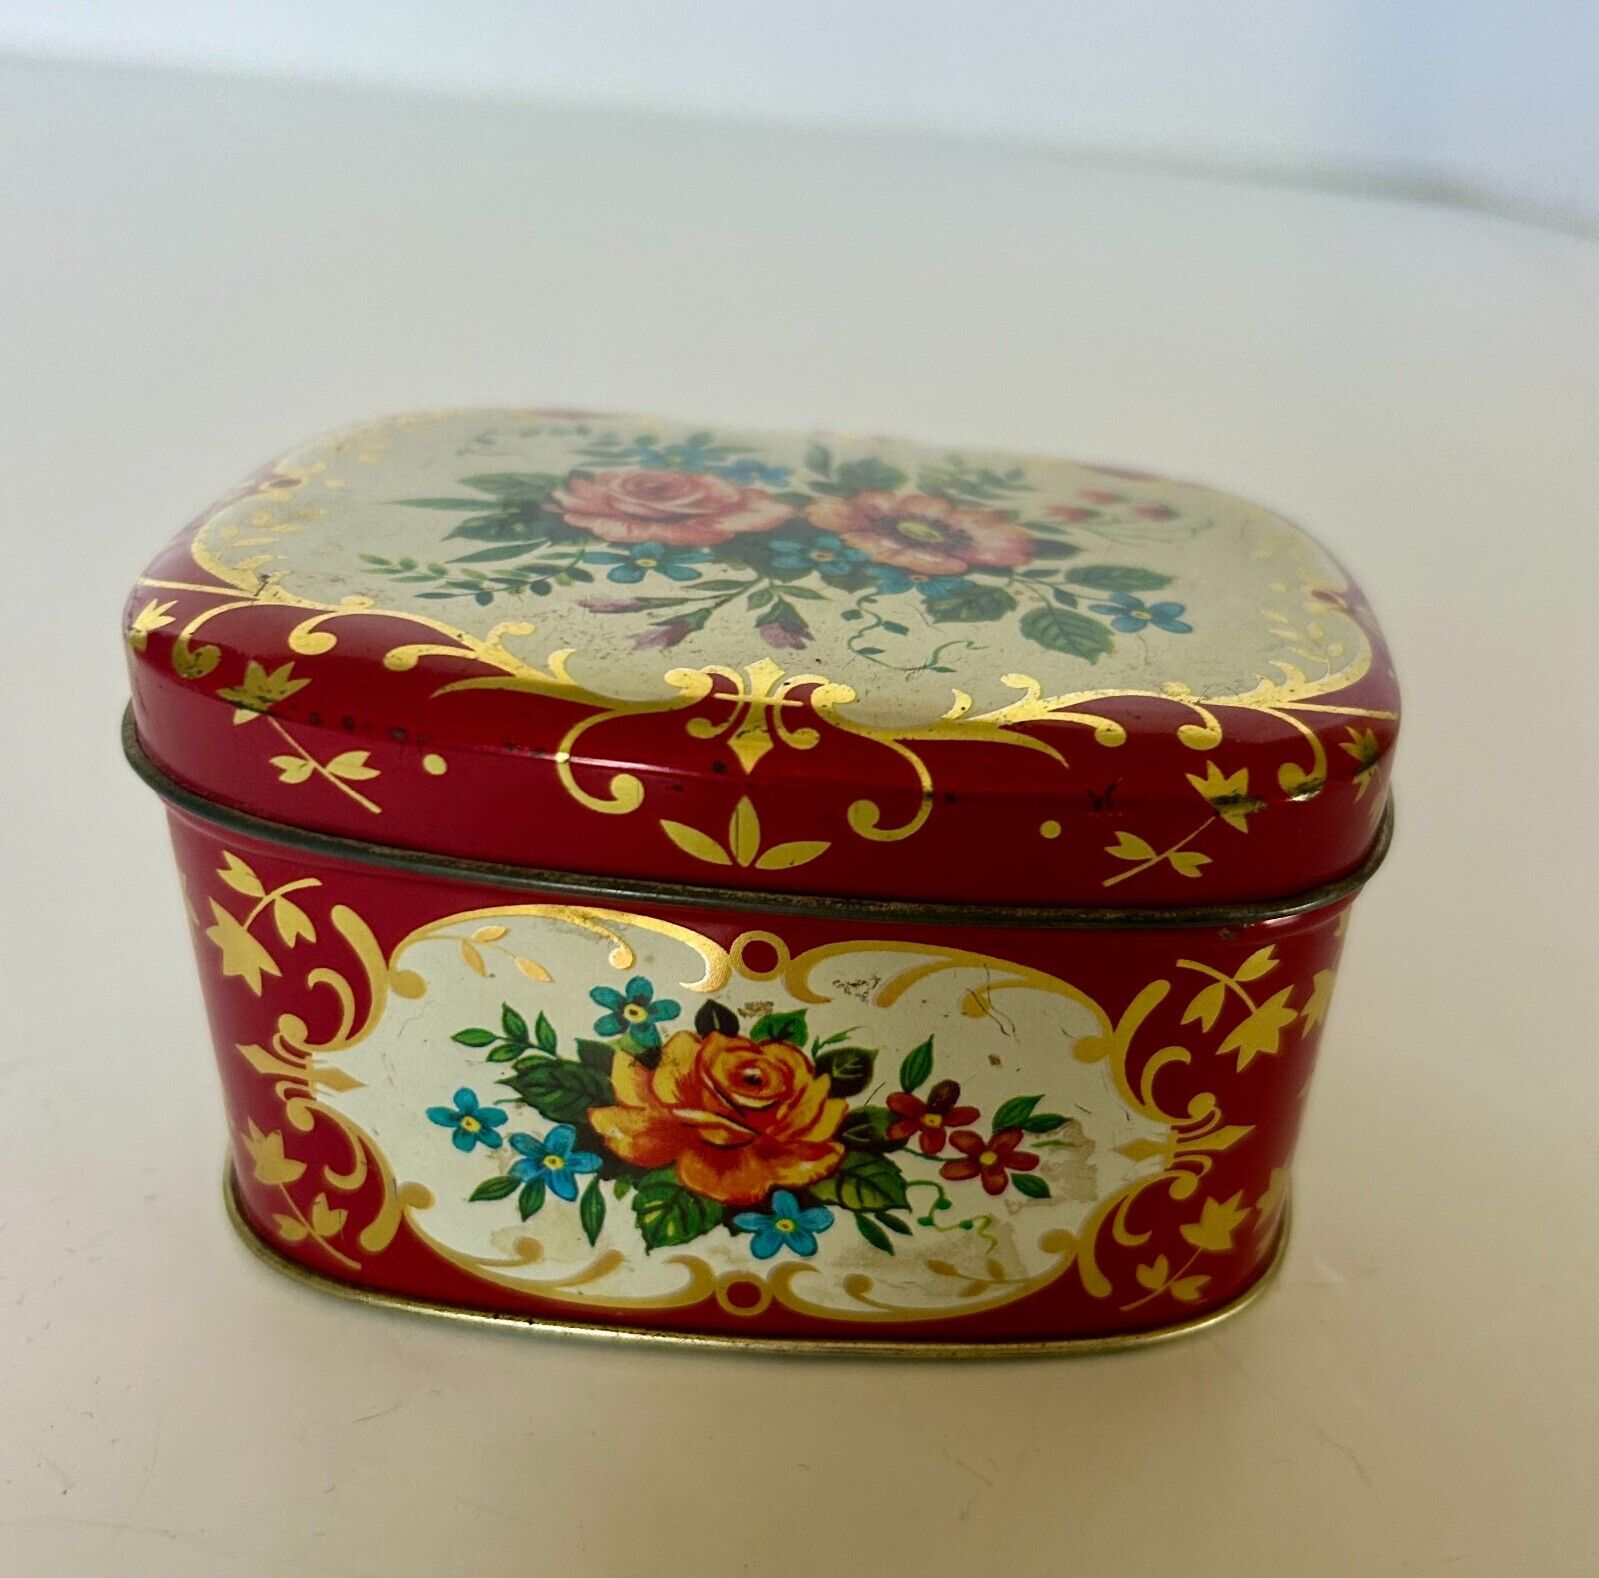 Metal trinket box made in England floral and gilt decor hinged lid rounded edges